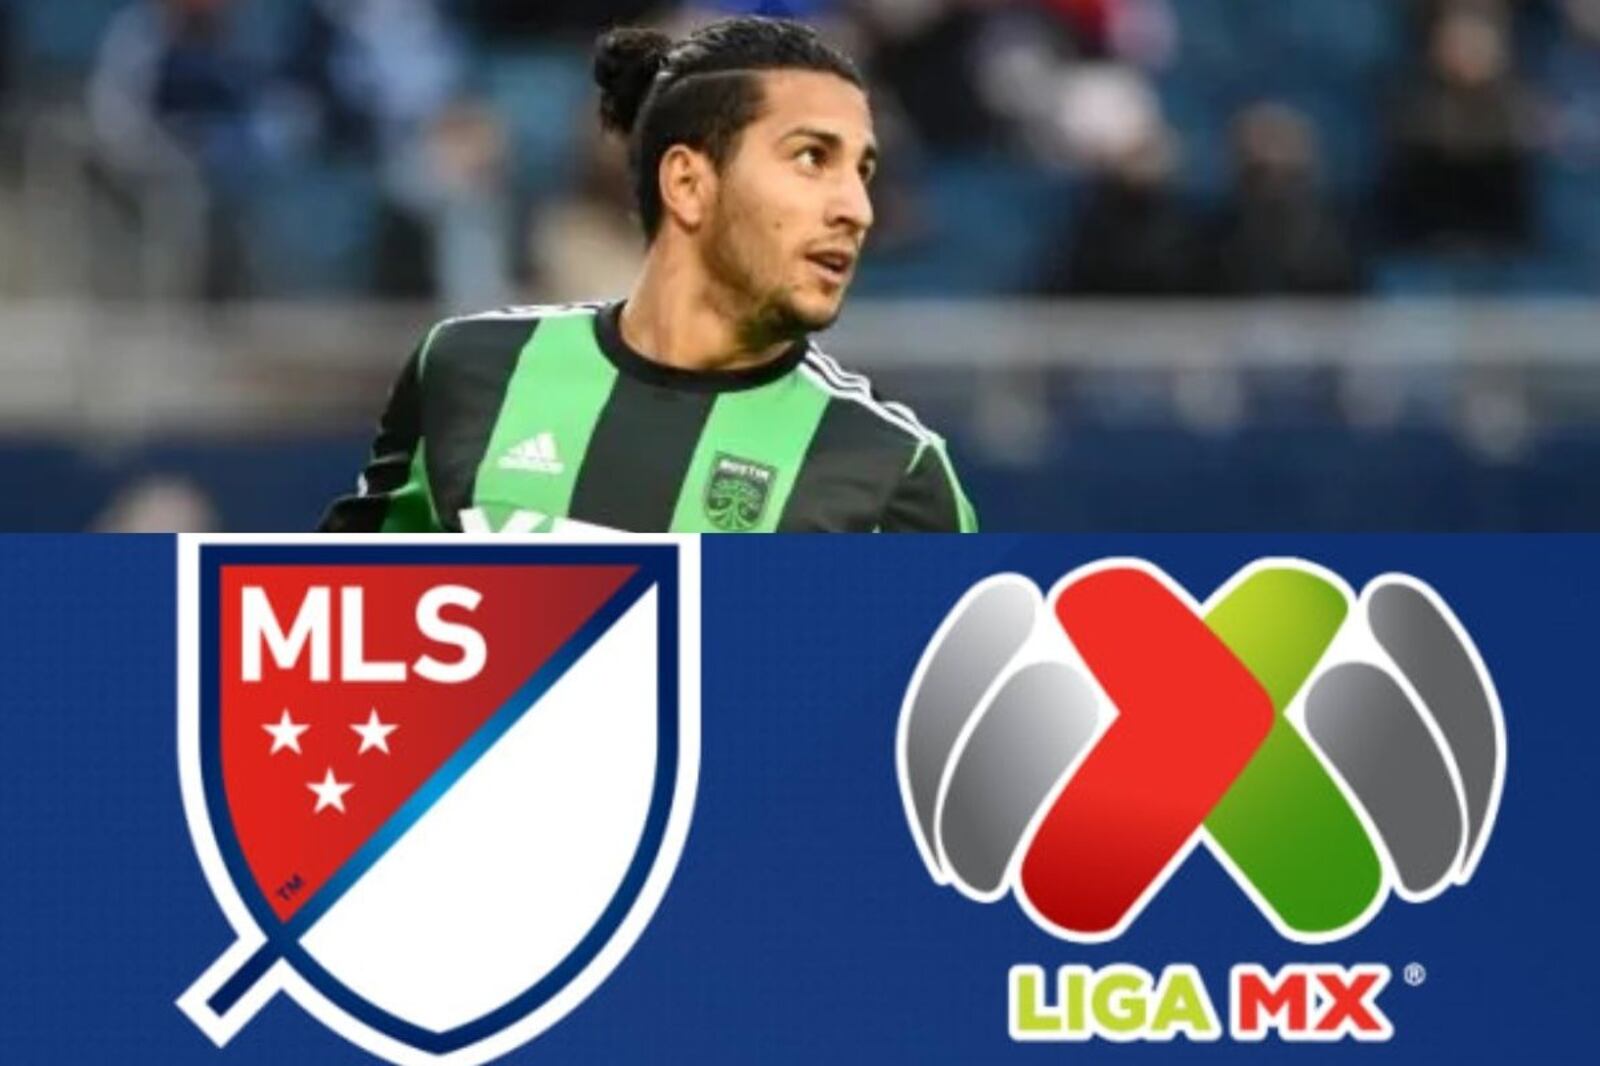 In the MLS this player was a resounding failure and now in Liga MX he has a new opportunity